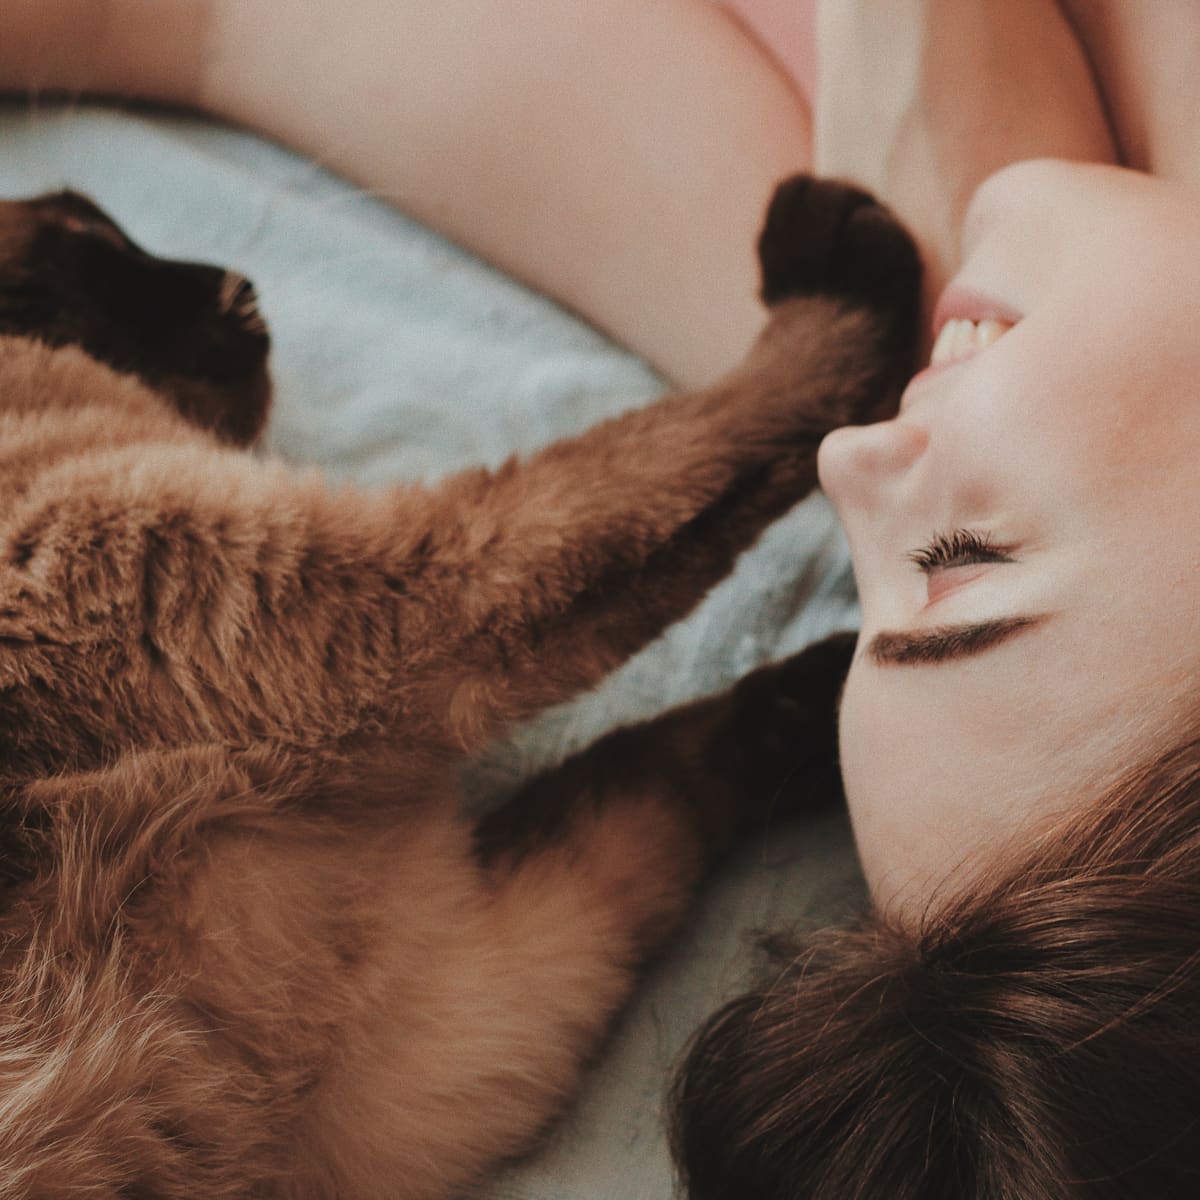 Why do cats purr?  Scientific American